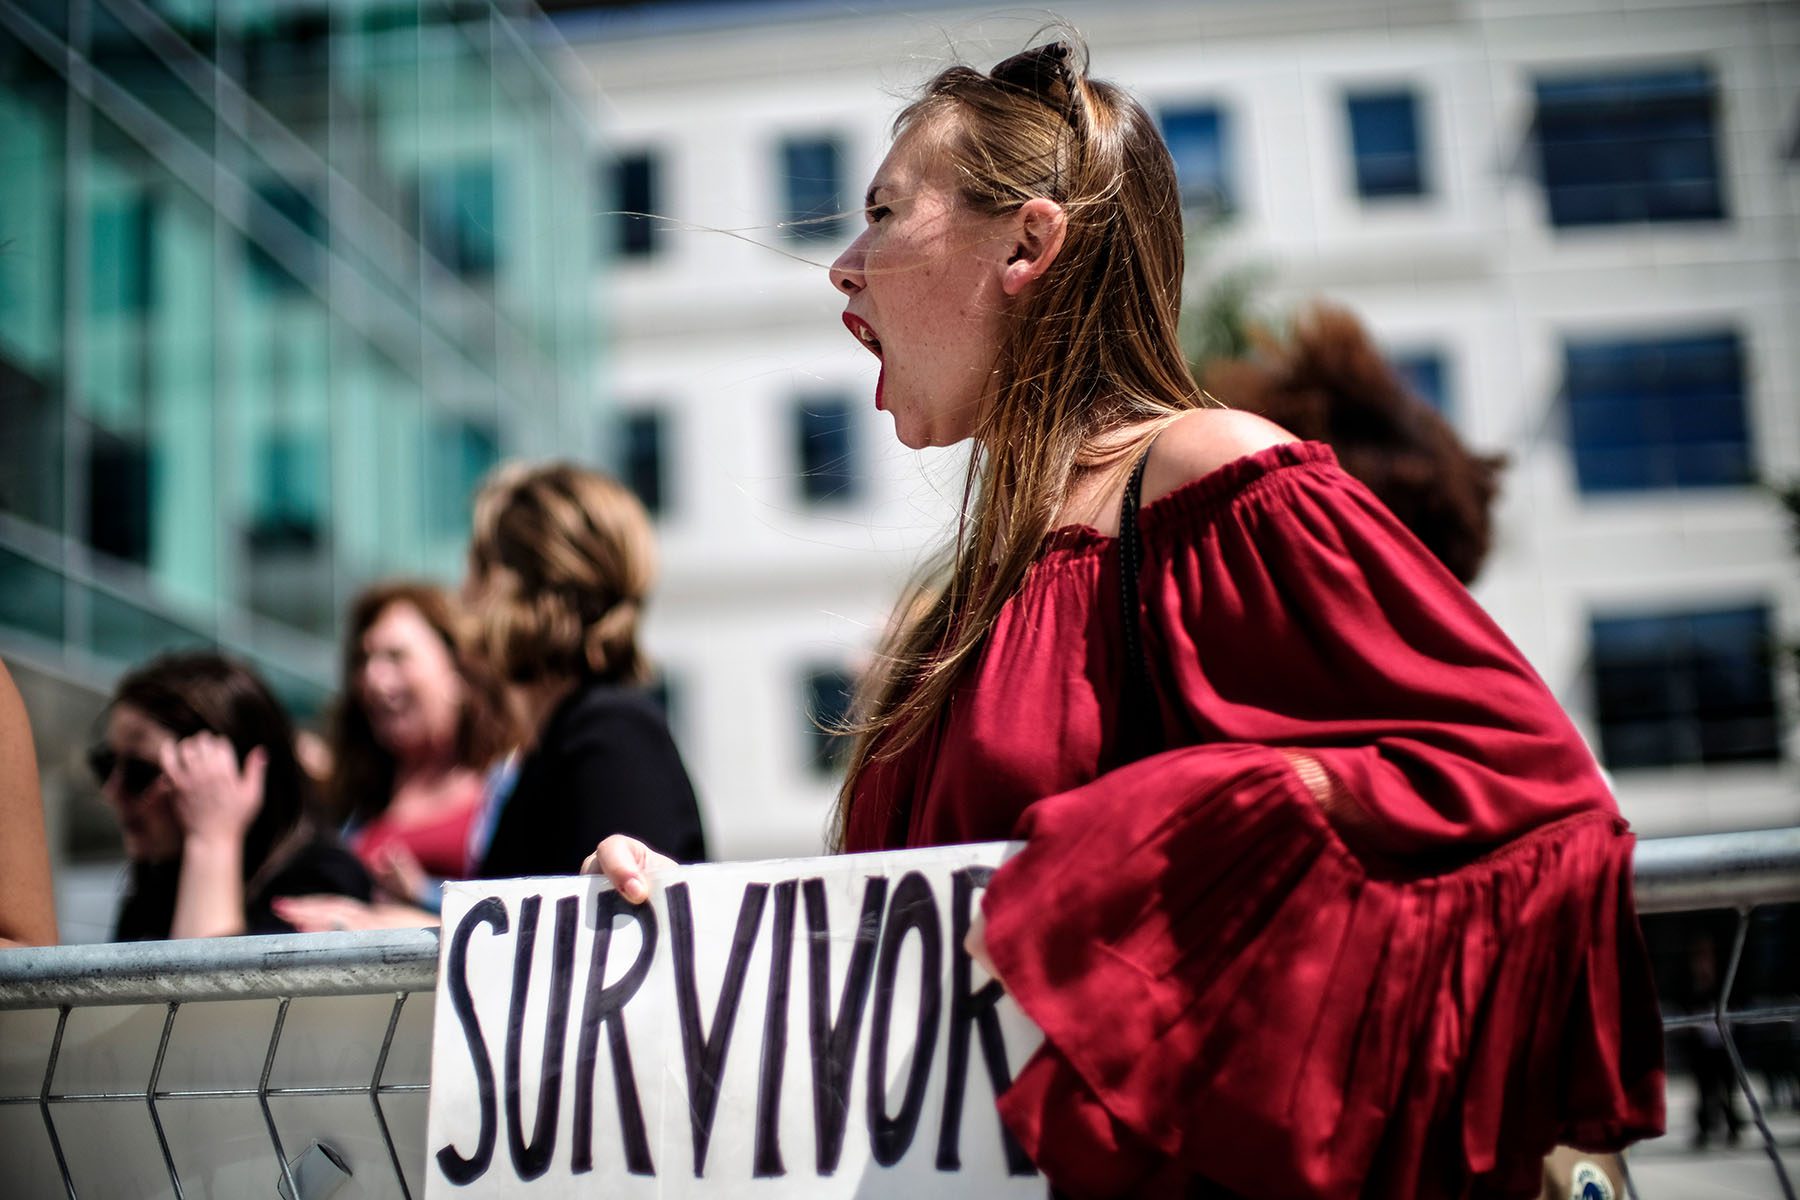 A woman is seen holding a sign that reads "survivor" and chanting slogans at a gathering.